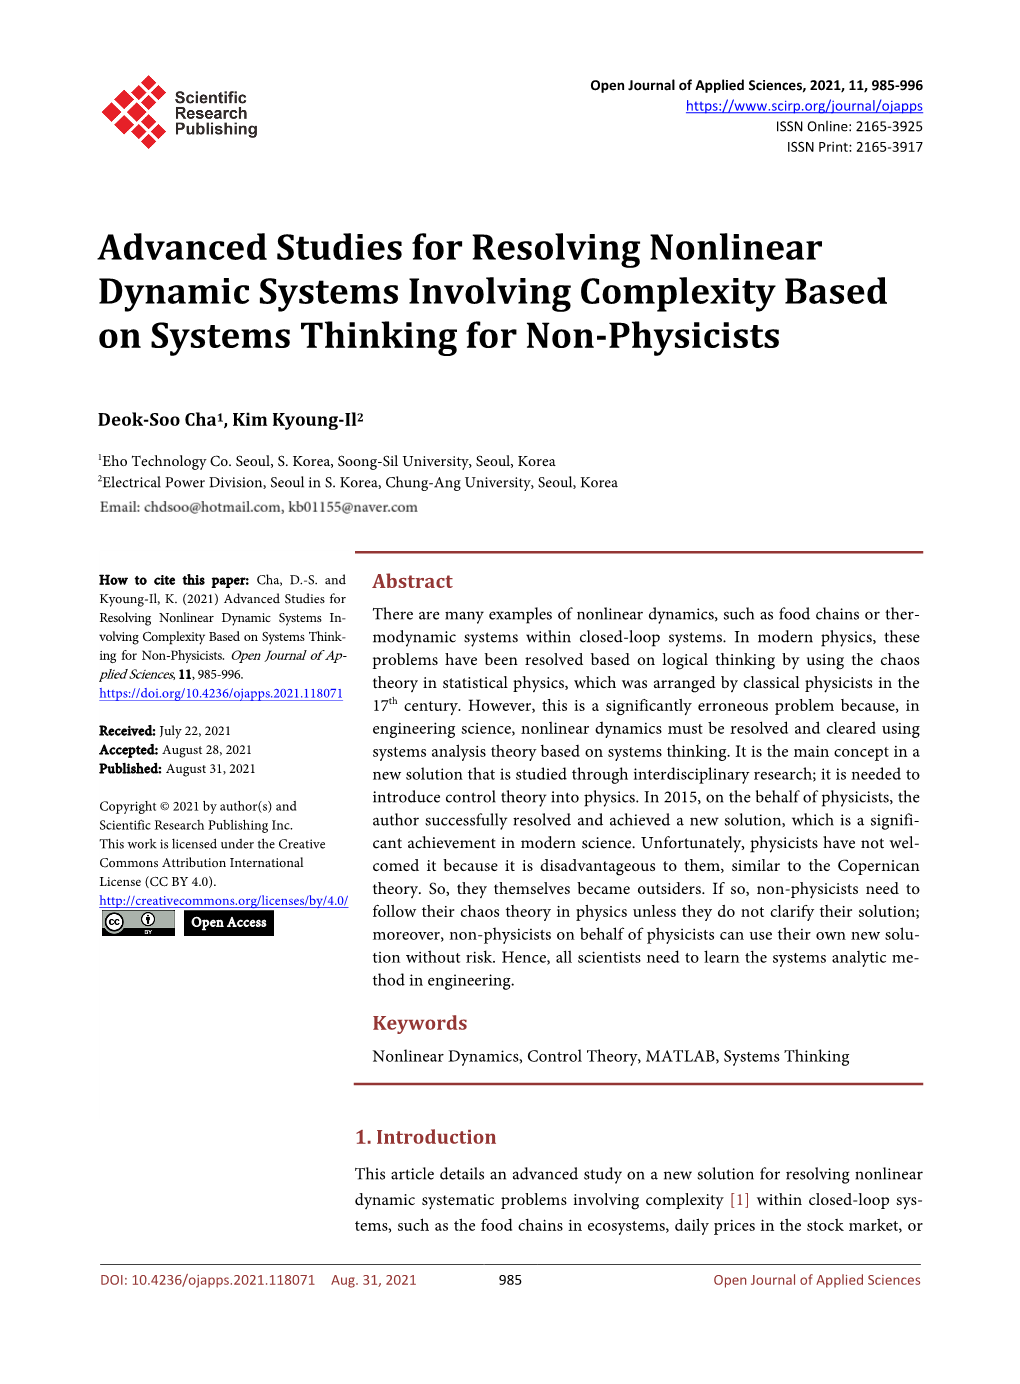 Advanced Studies for Resolving Nonlinear Dynamic Systems Involving Complexity Based on Systems Thinking for Non-Physicists